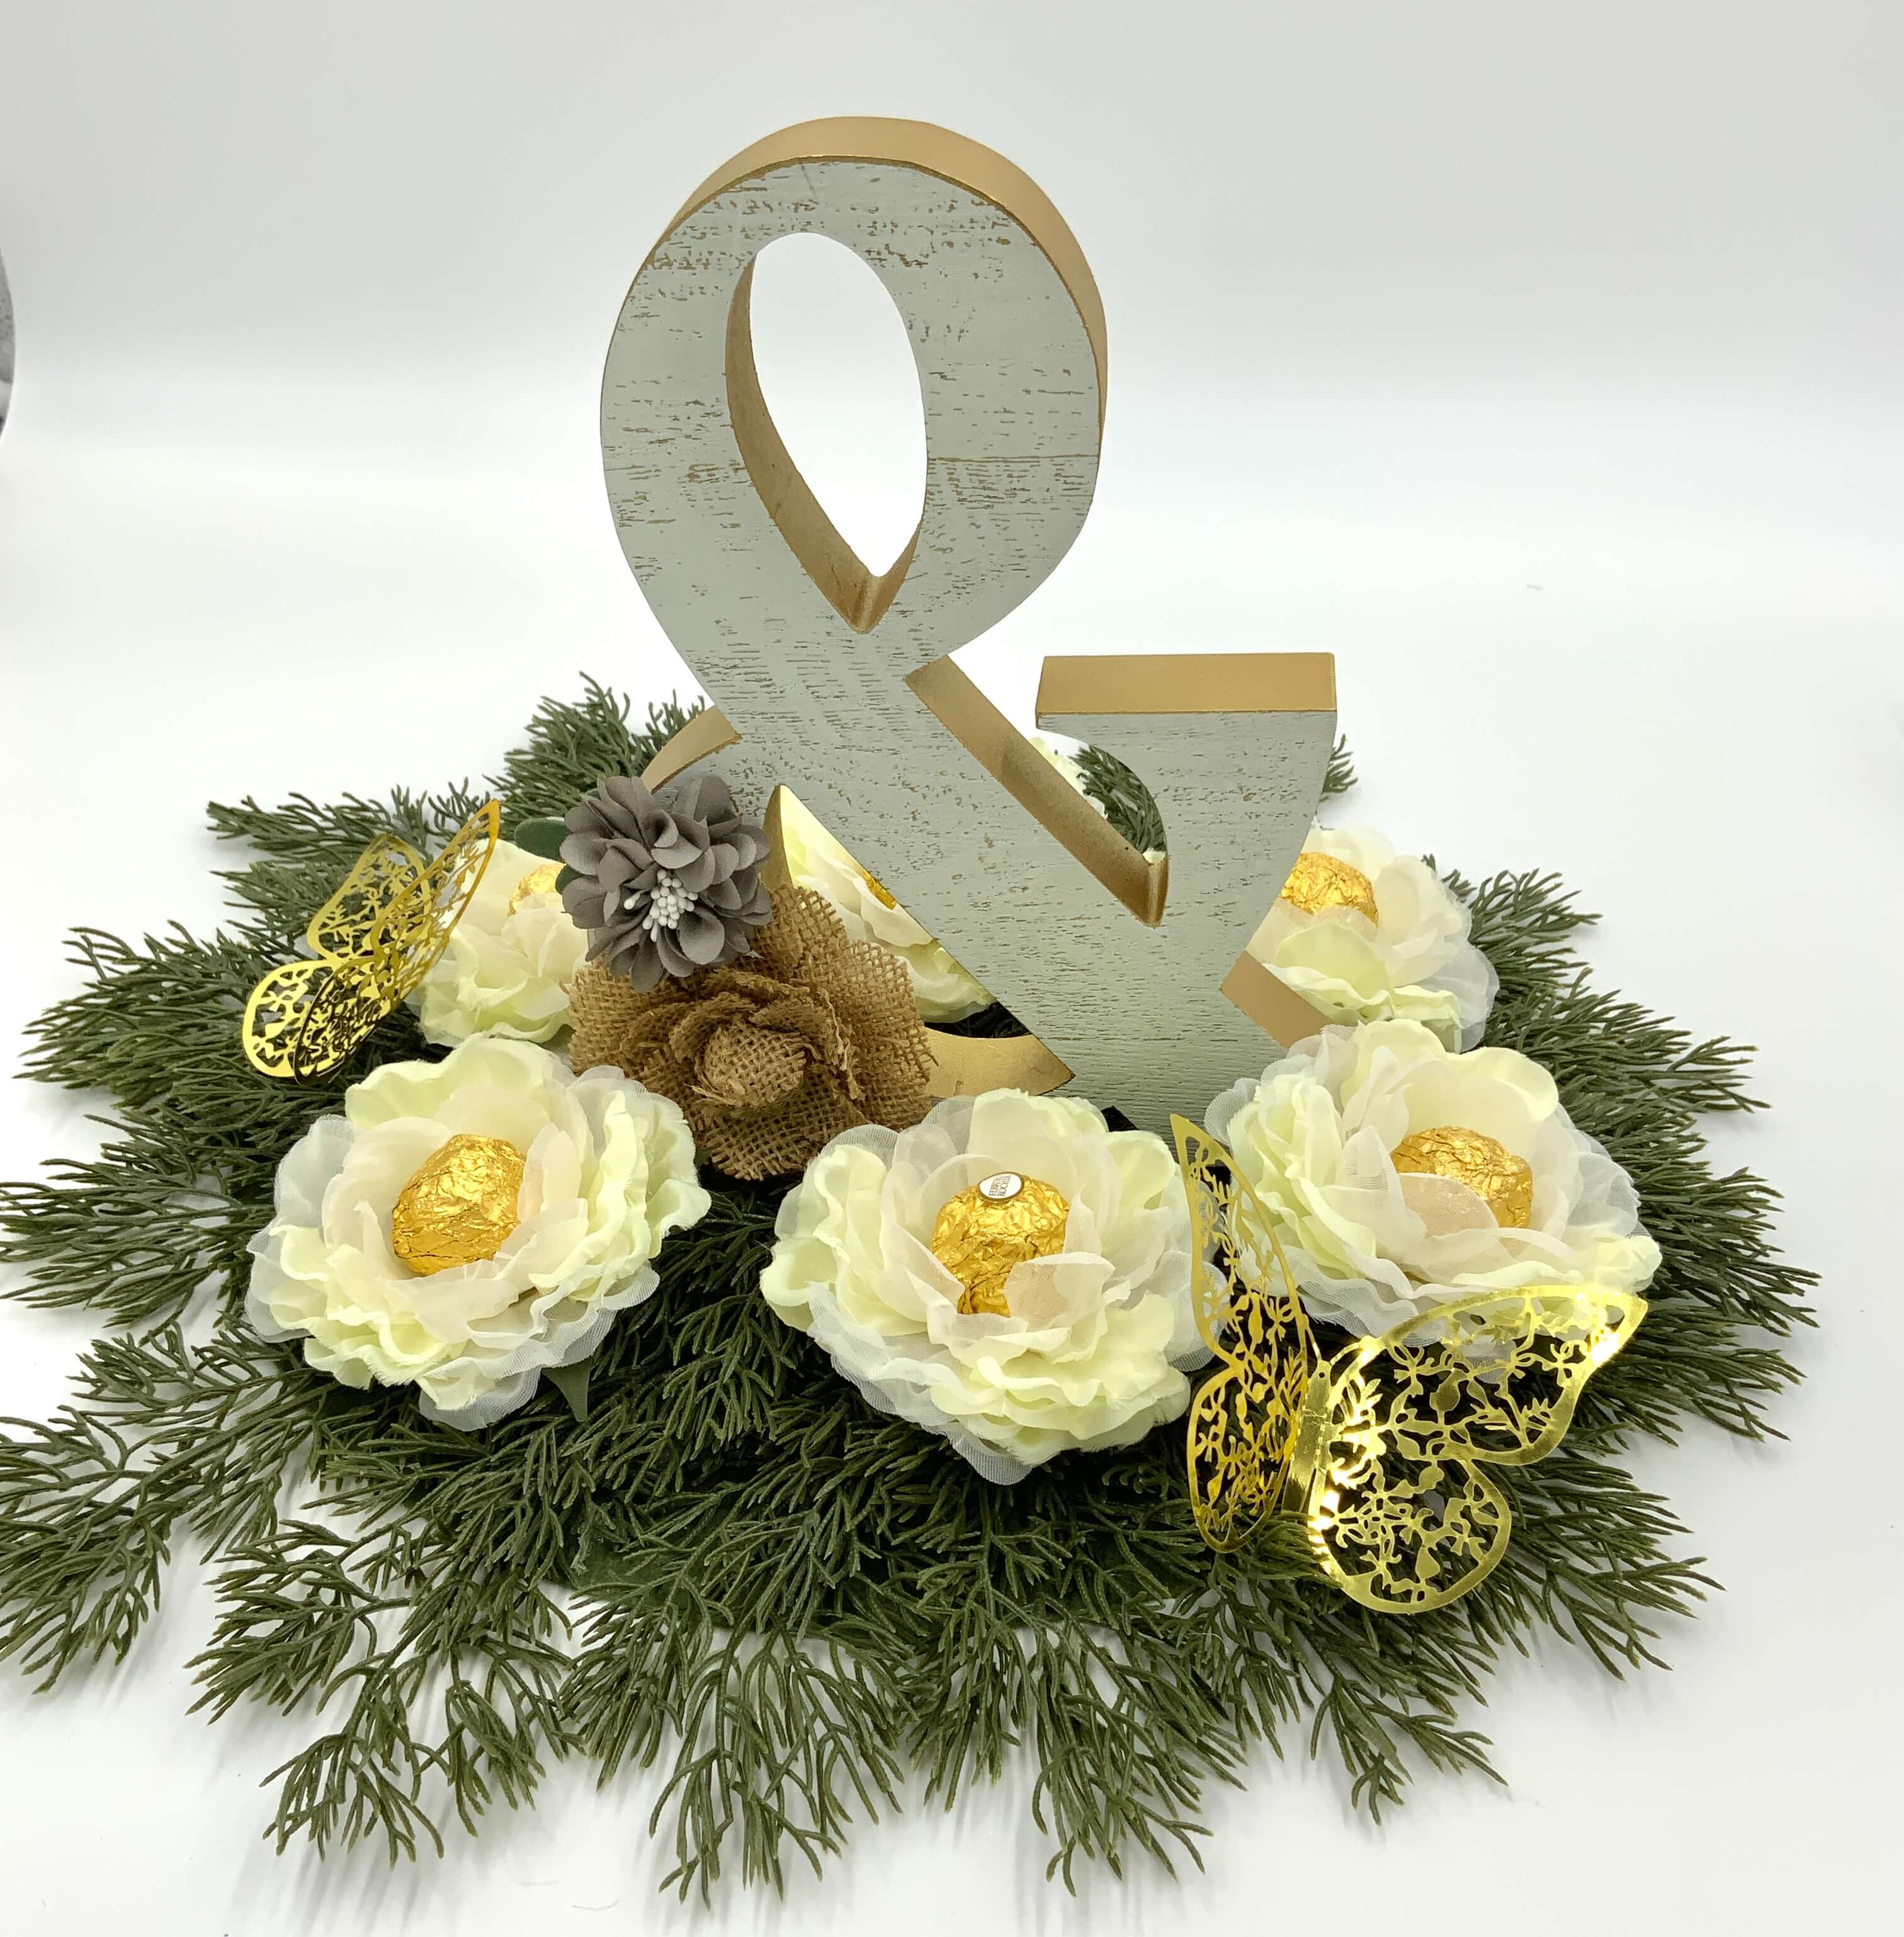 Delicate Yellow Flowers For Bridal Or Baby Shower Decor. Unique and Inexpensive Party Favors